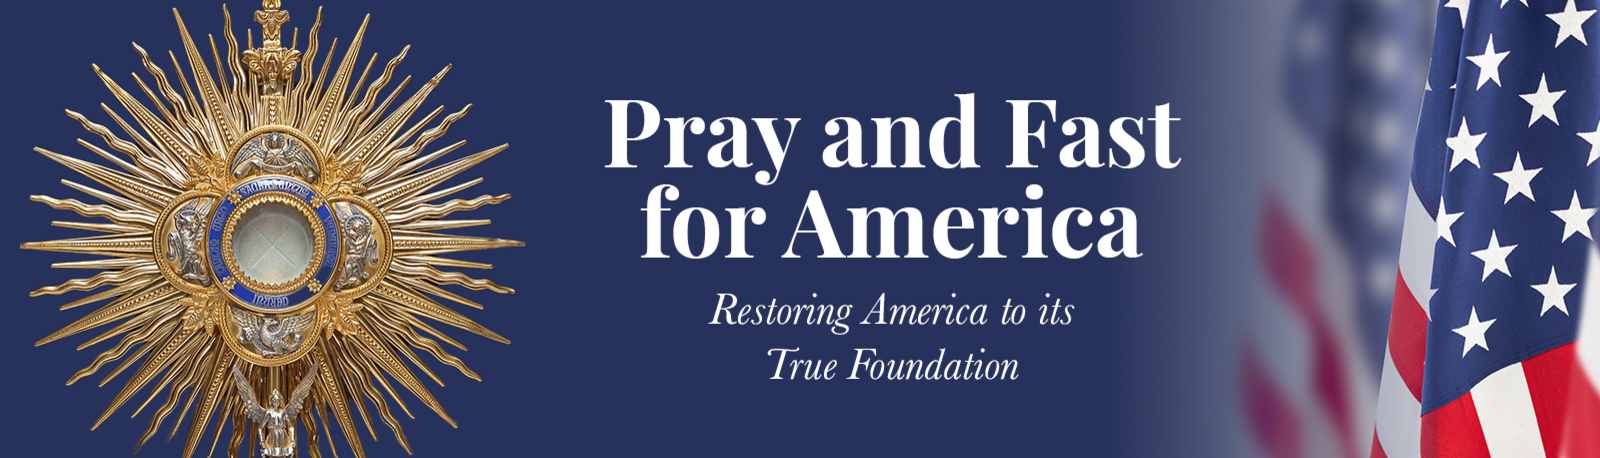 Pray And Fast For America Banner